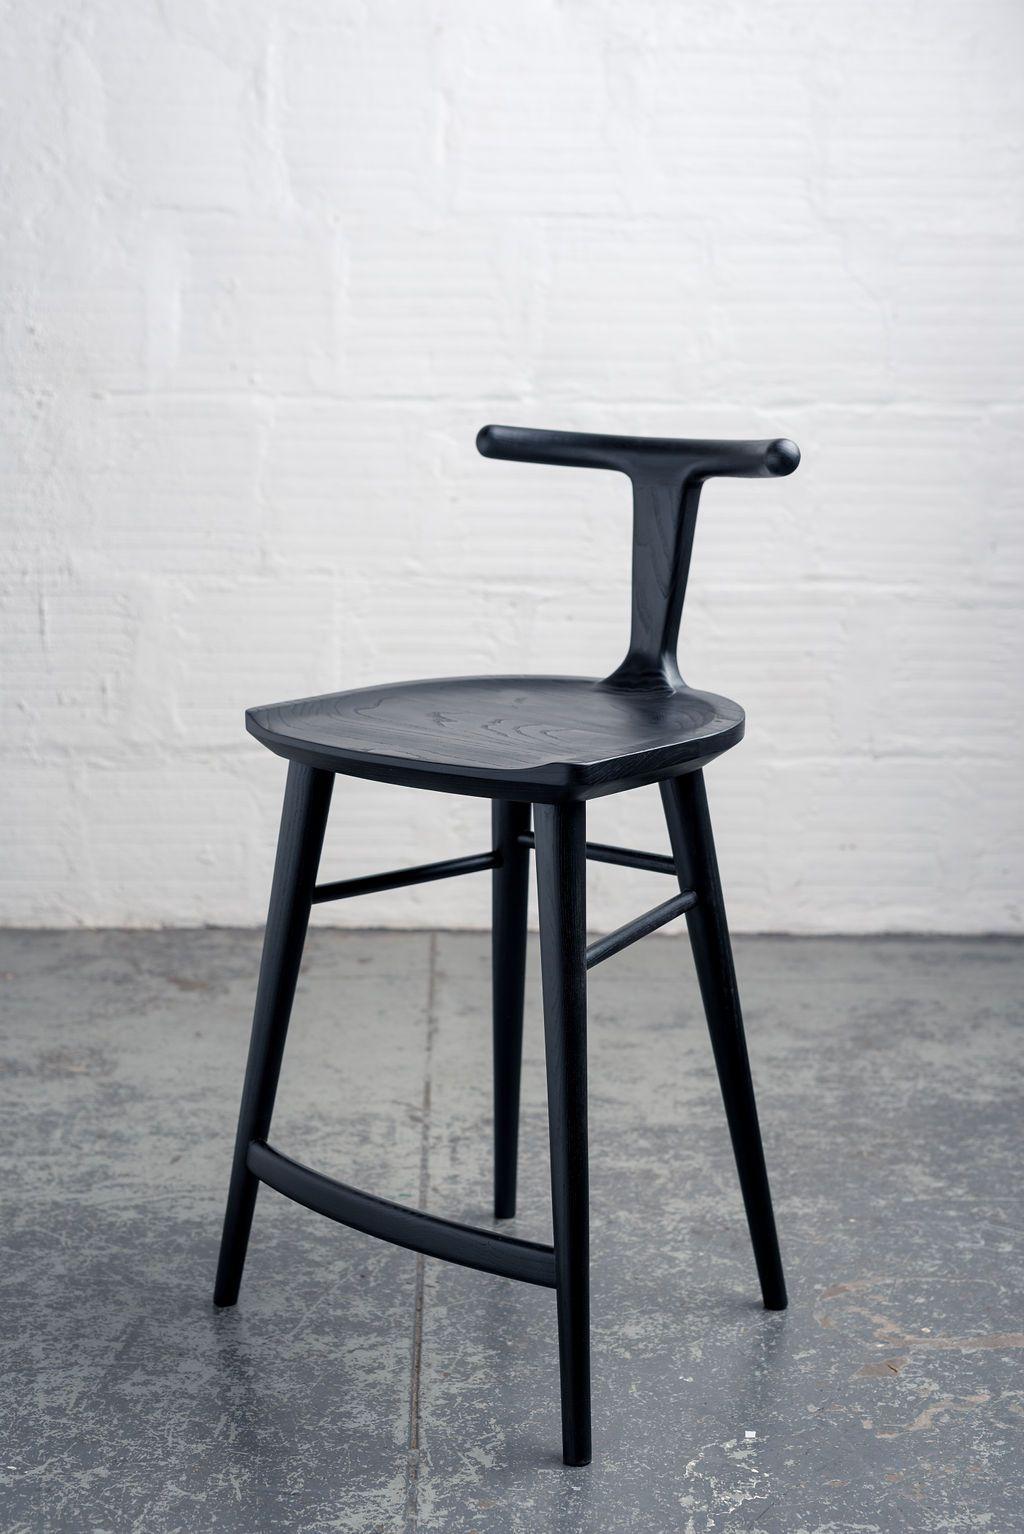 Contemporary Charcoal Ash Oxbend Stool with Leather Seat Pad by Fernweh Woodworking